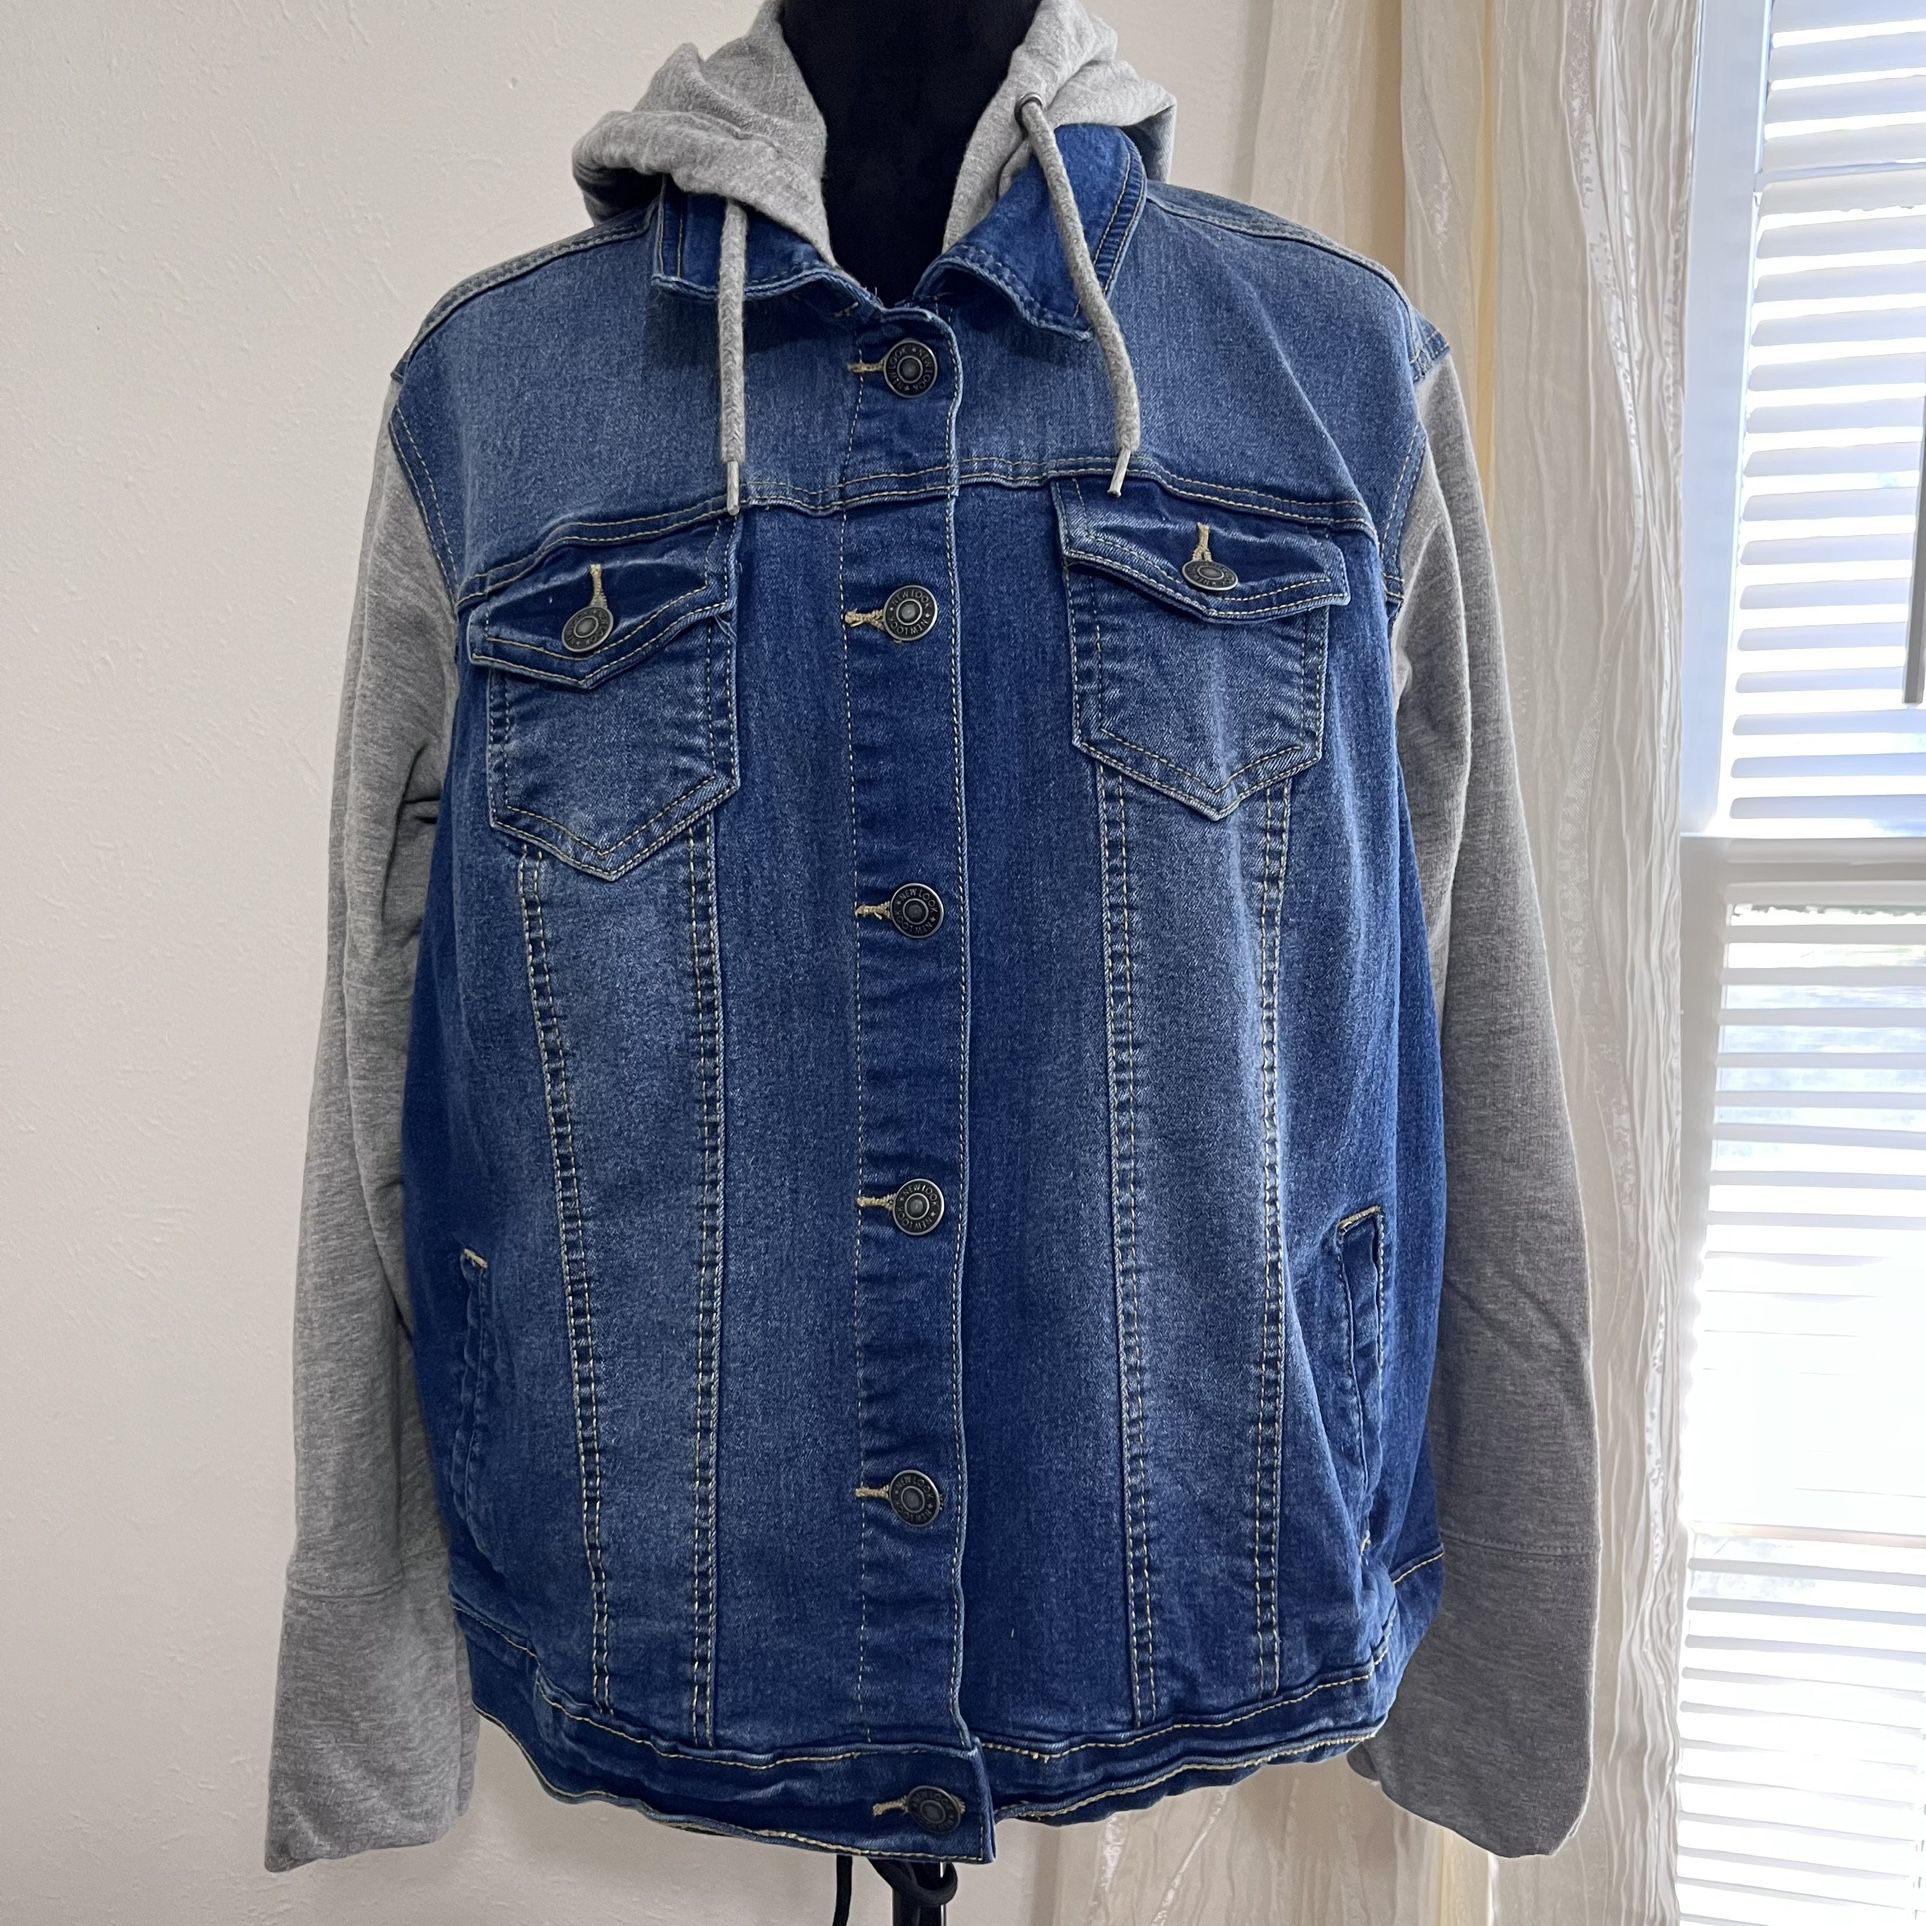 New Look Jackets & Coats | New Look Denim/Sweater Hooded Jacket | Color: Blue/Gray | Size: 1X